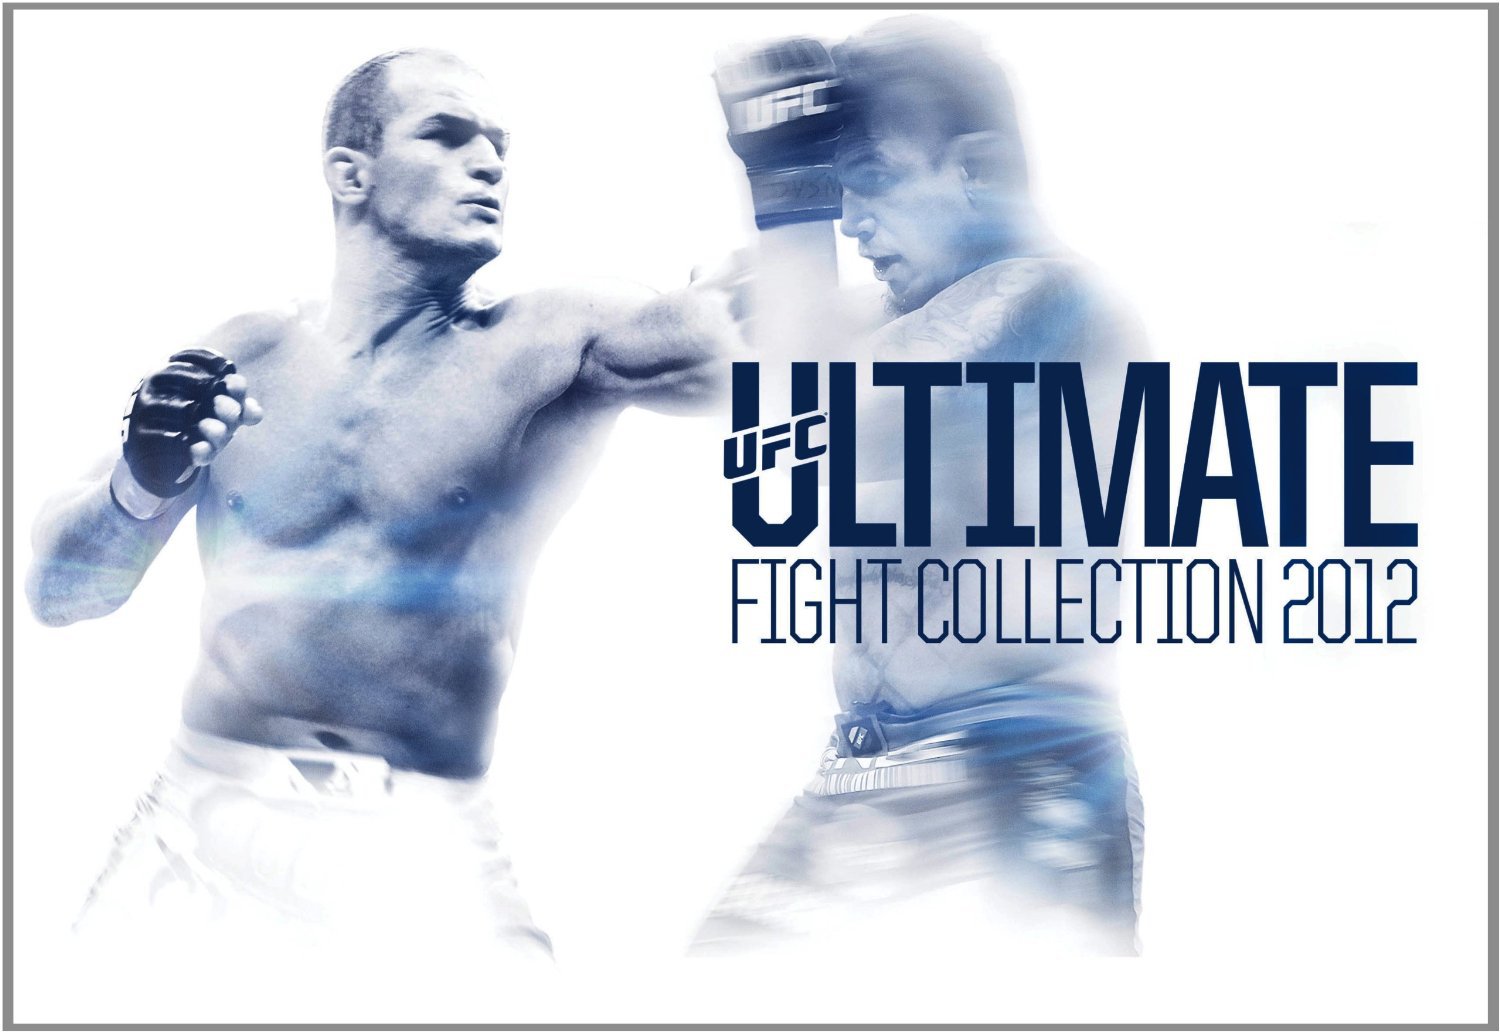 UFC Ultimate Fight Collection